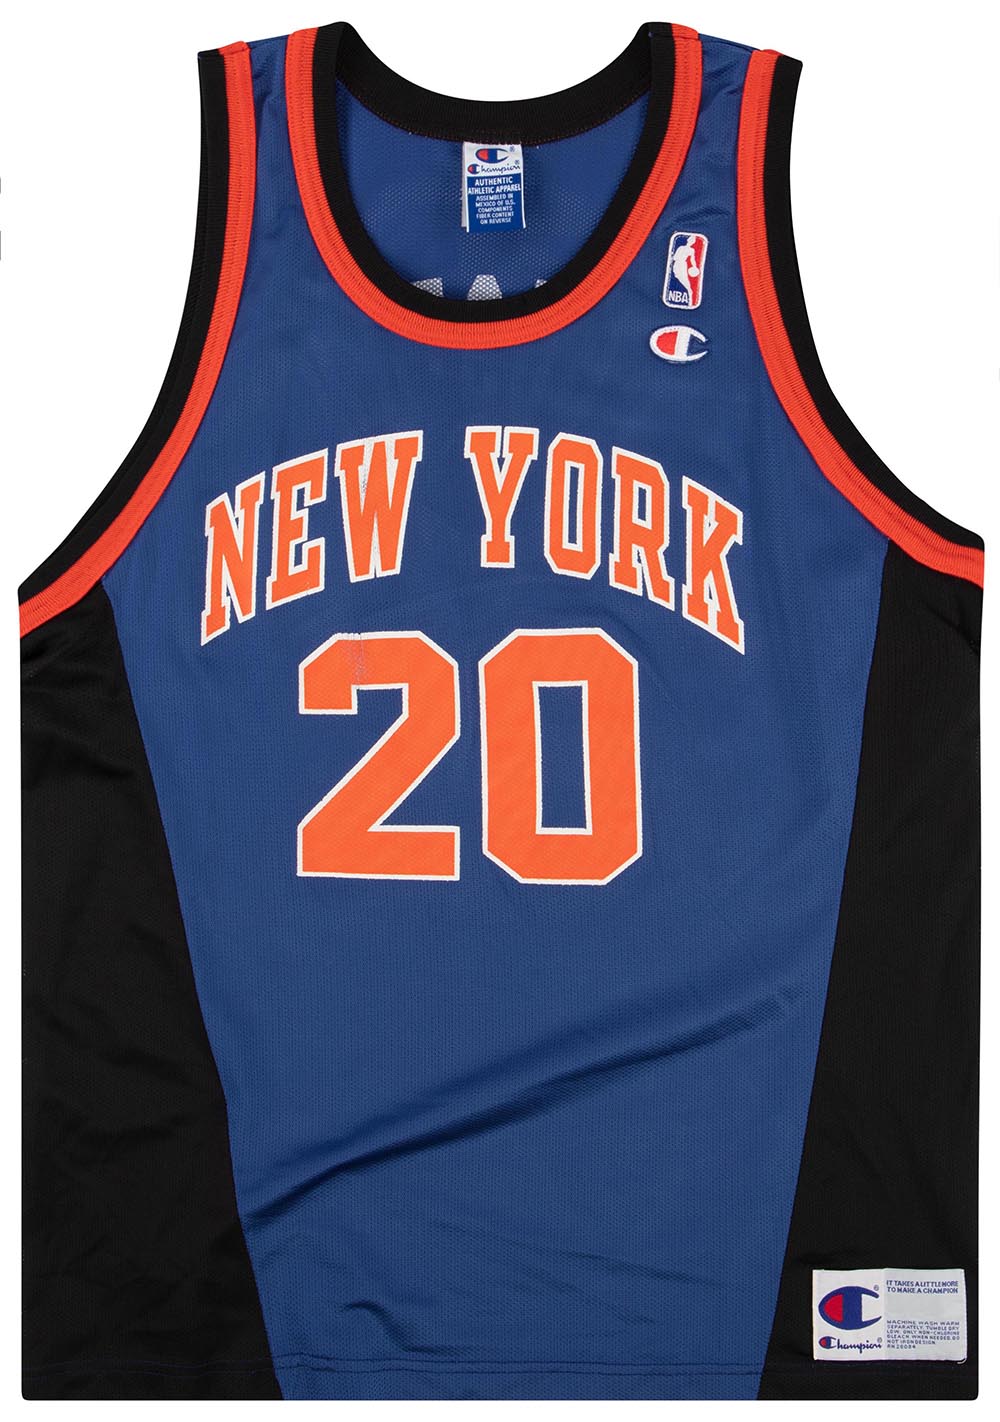 New York Knicks Invert a Classic Look For City Edition Uniforms